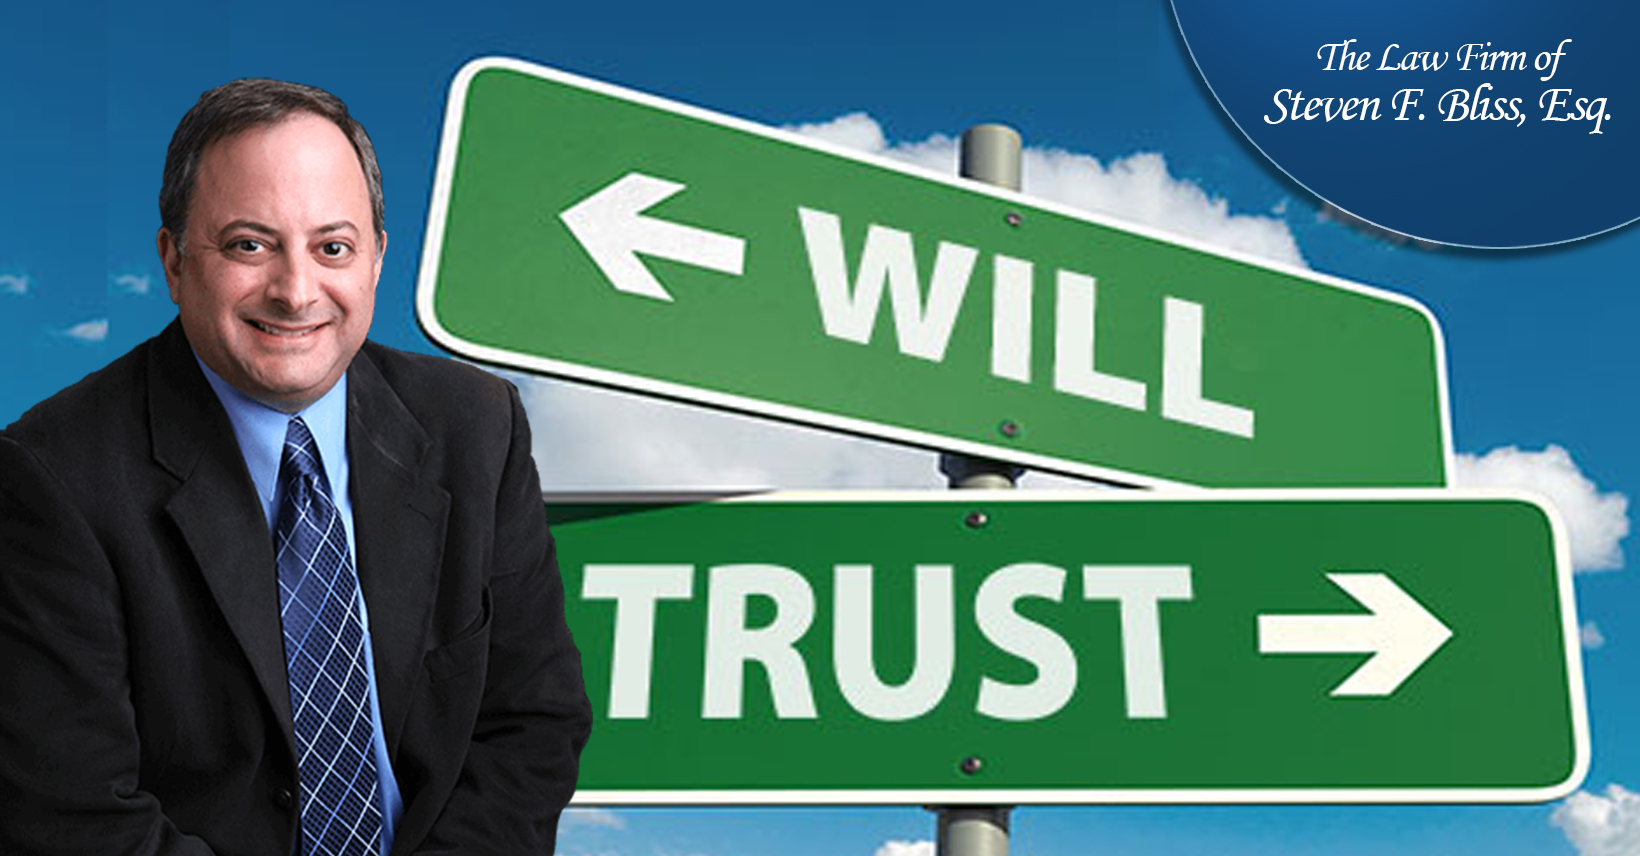 wills-and-trusts-which-should-you-have-if-i-have-a-living-trust-do-i